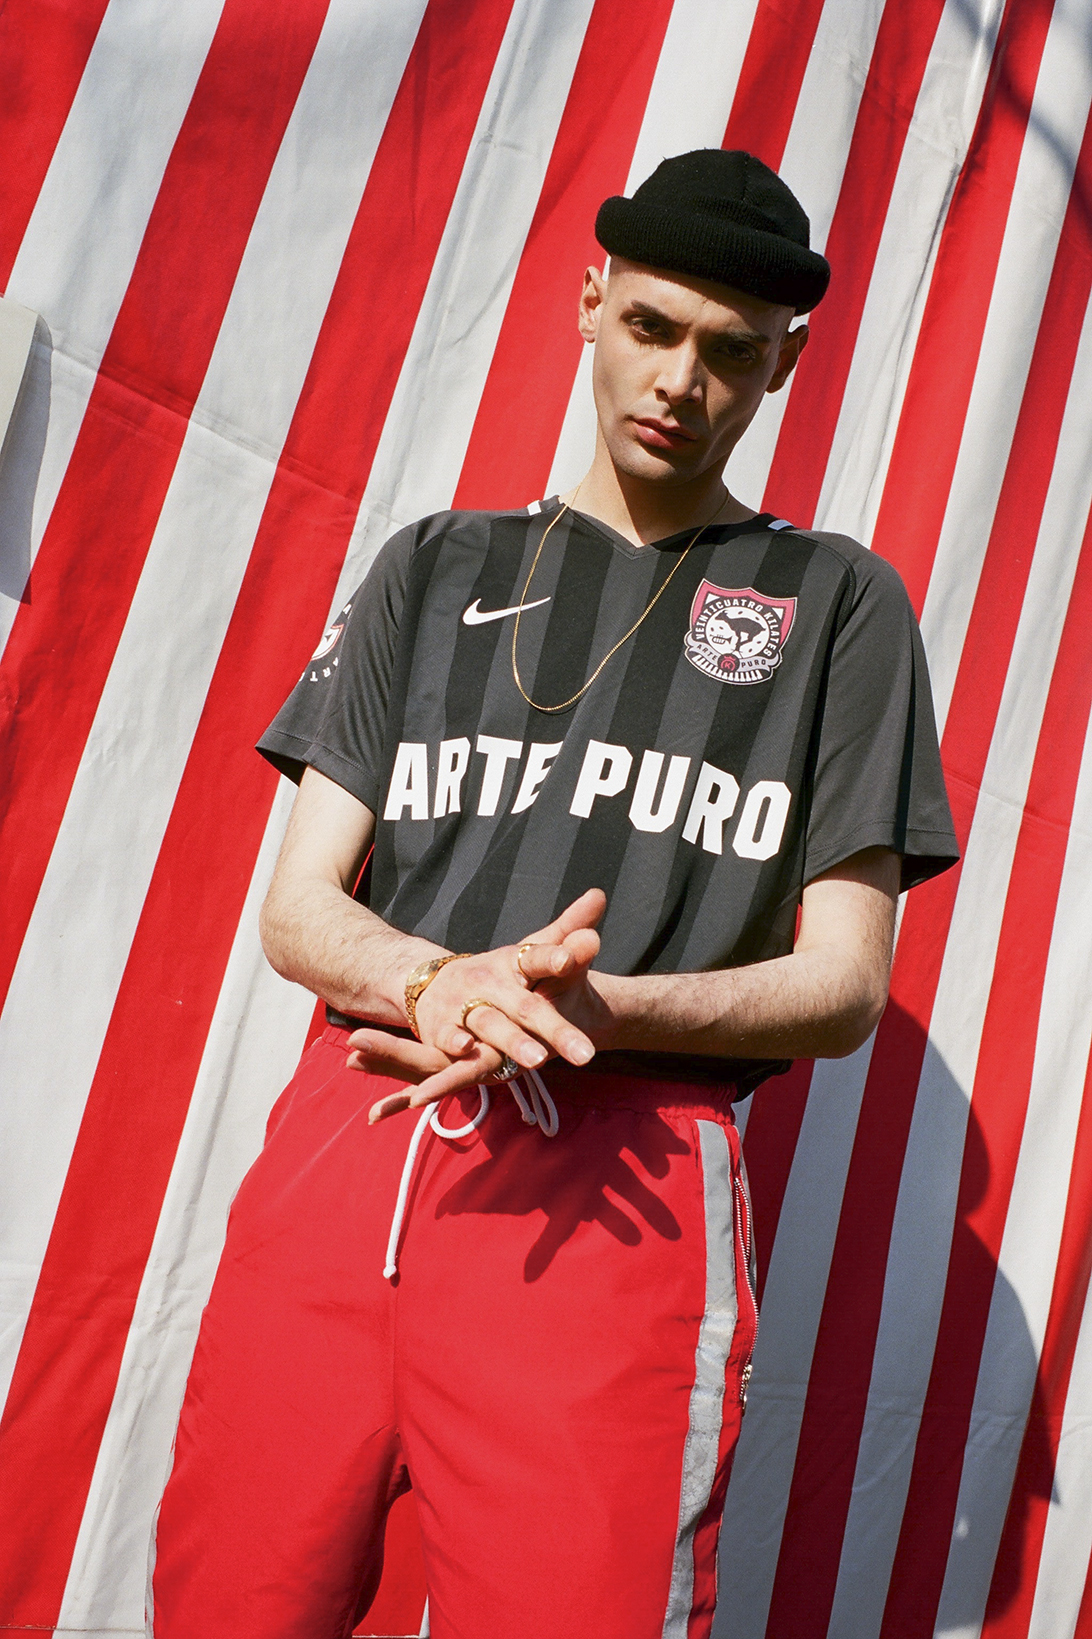 24 Kilates Nike Football Jersey Collaboration Arte Puro Black Grey Red Release Details Information World Cup 2018 FIFA